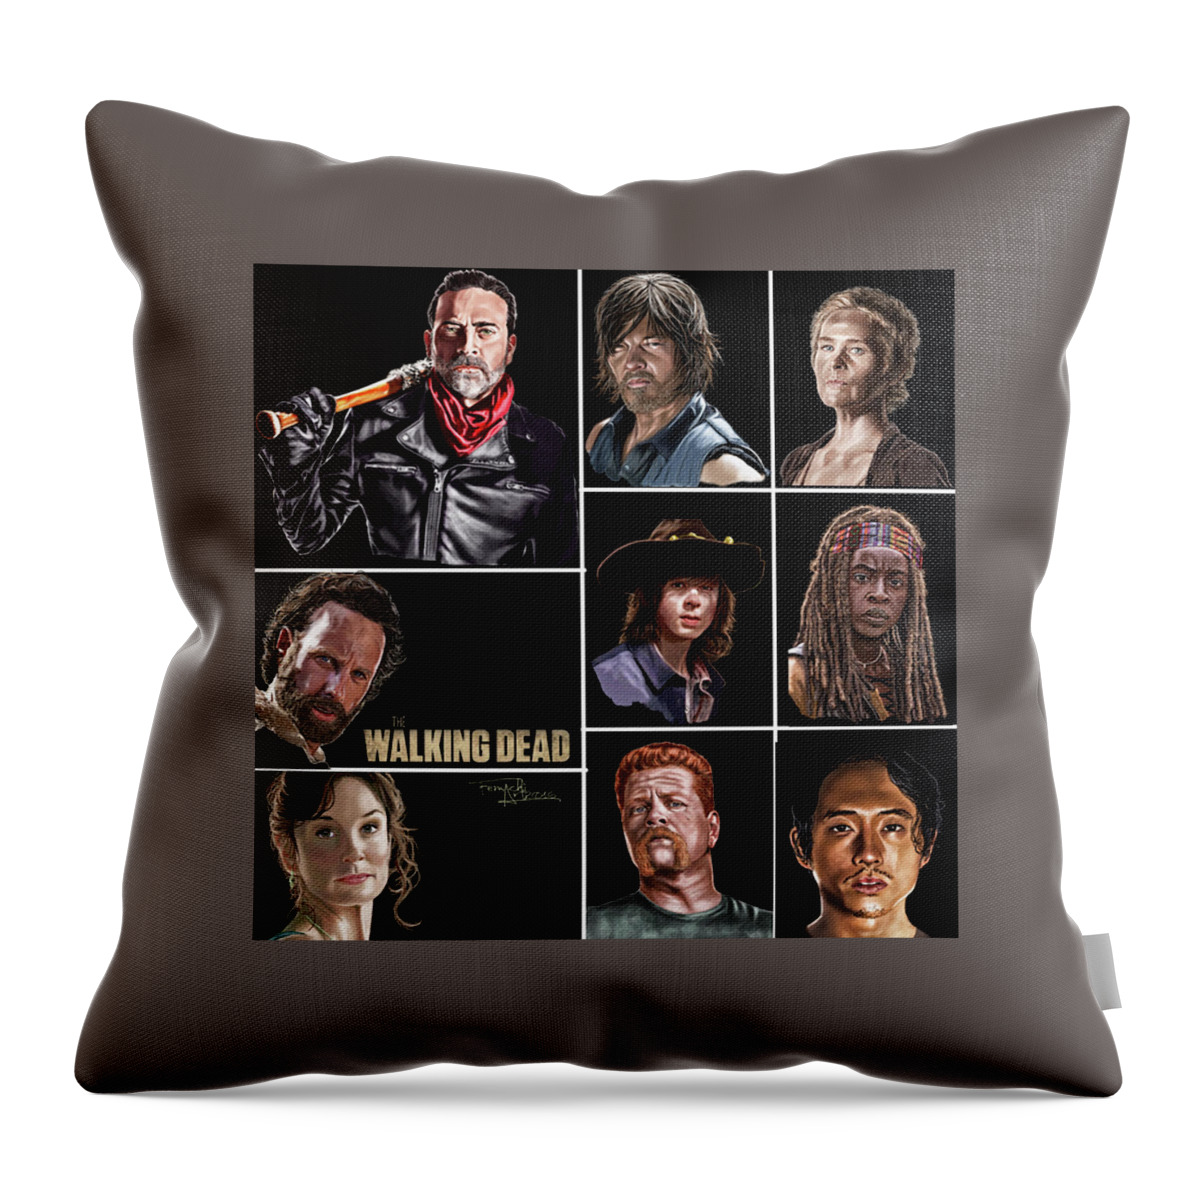 The Walking Dead Throw Pillow featuring the painting The Walking Dead by Femchi Art